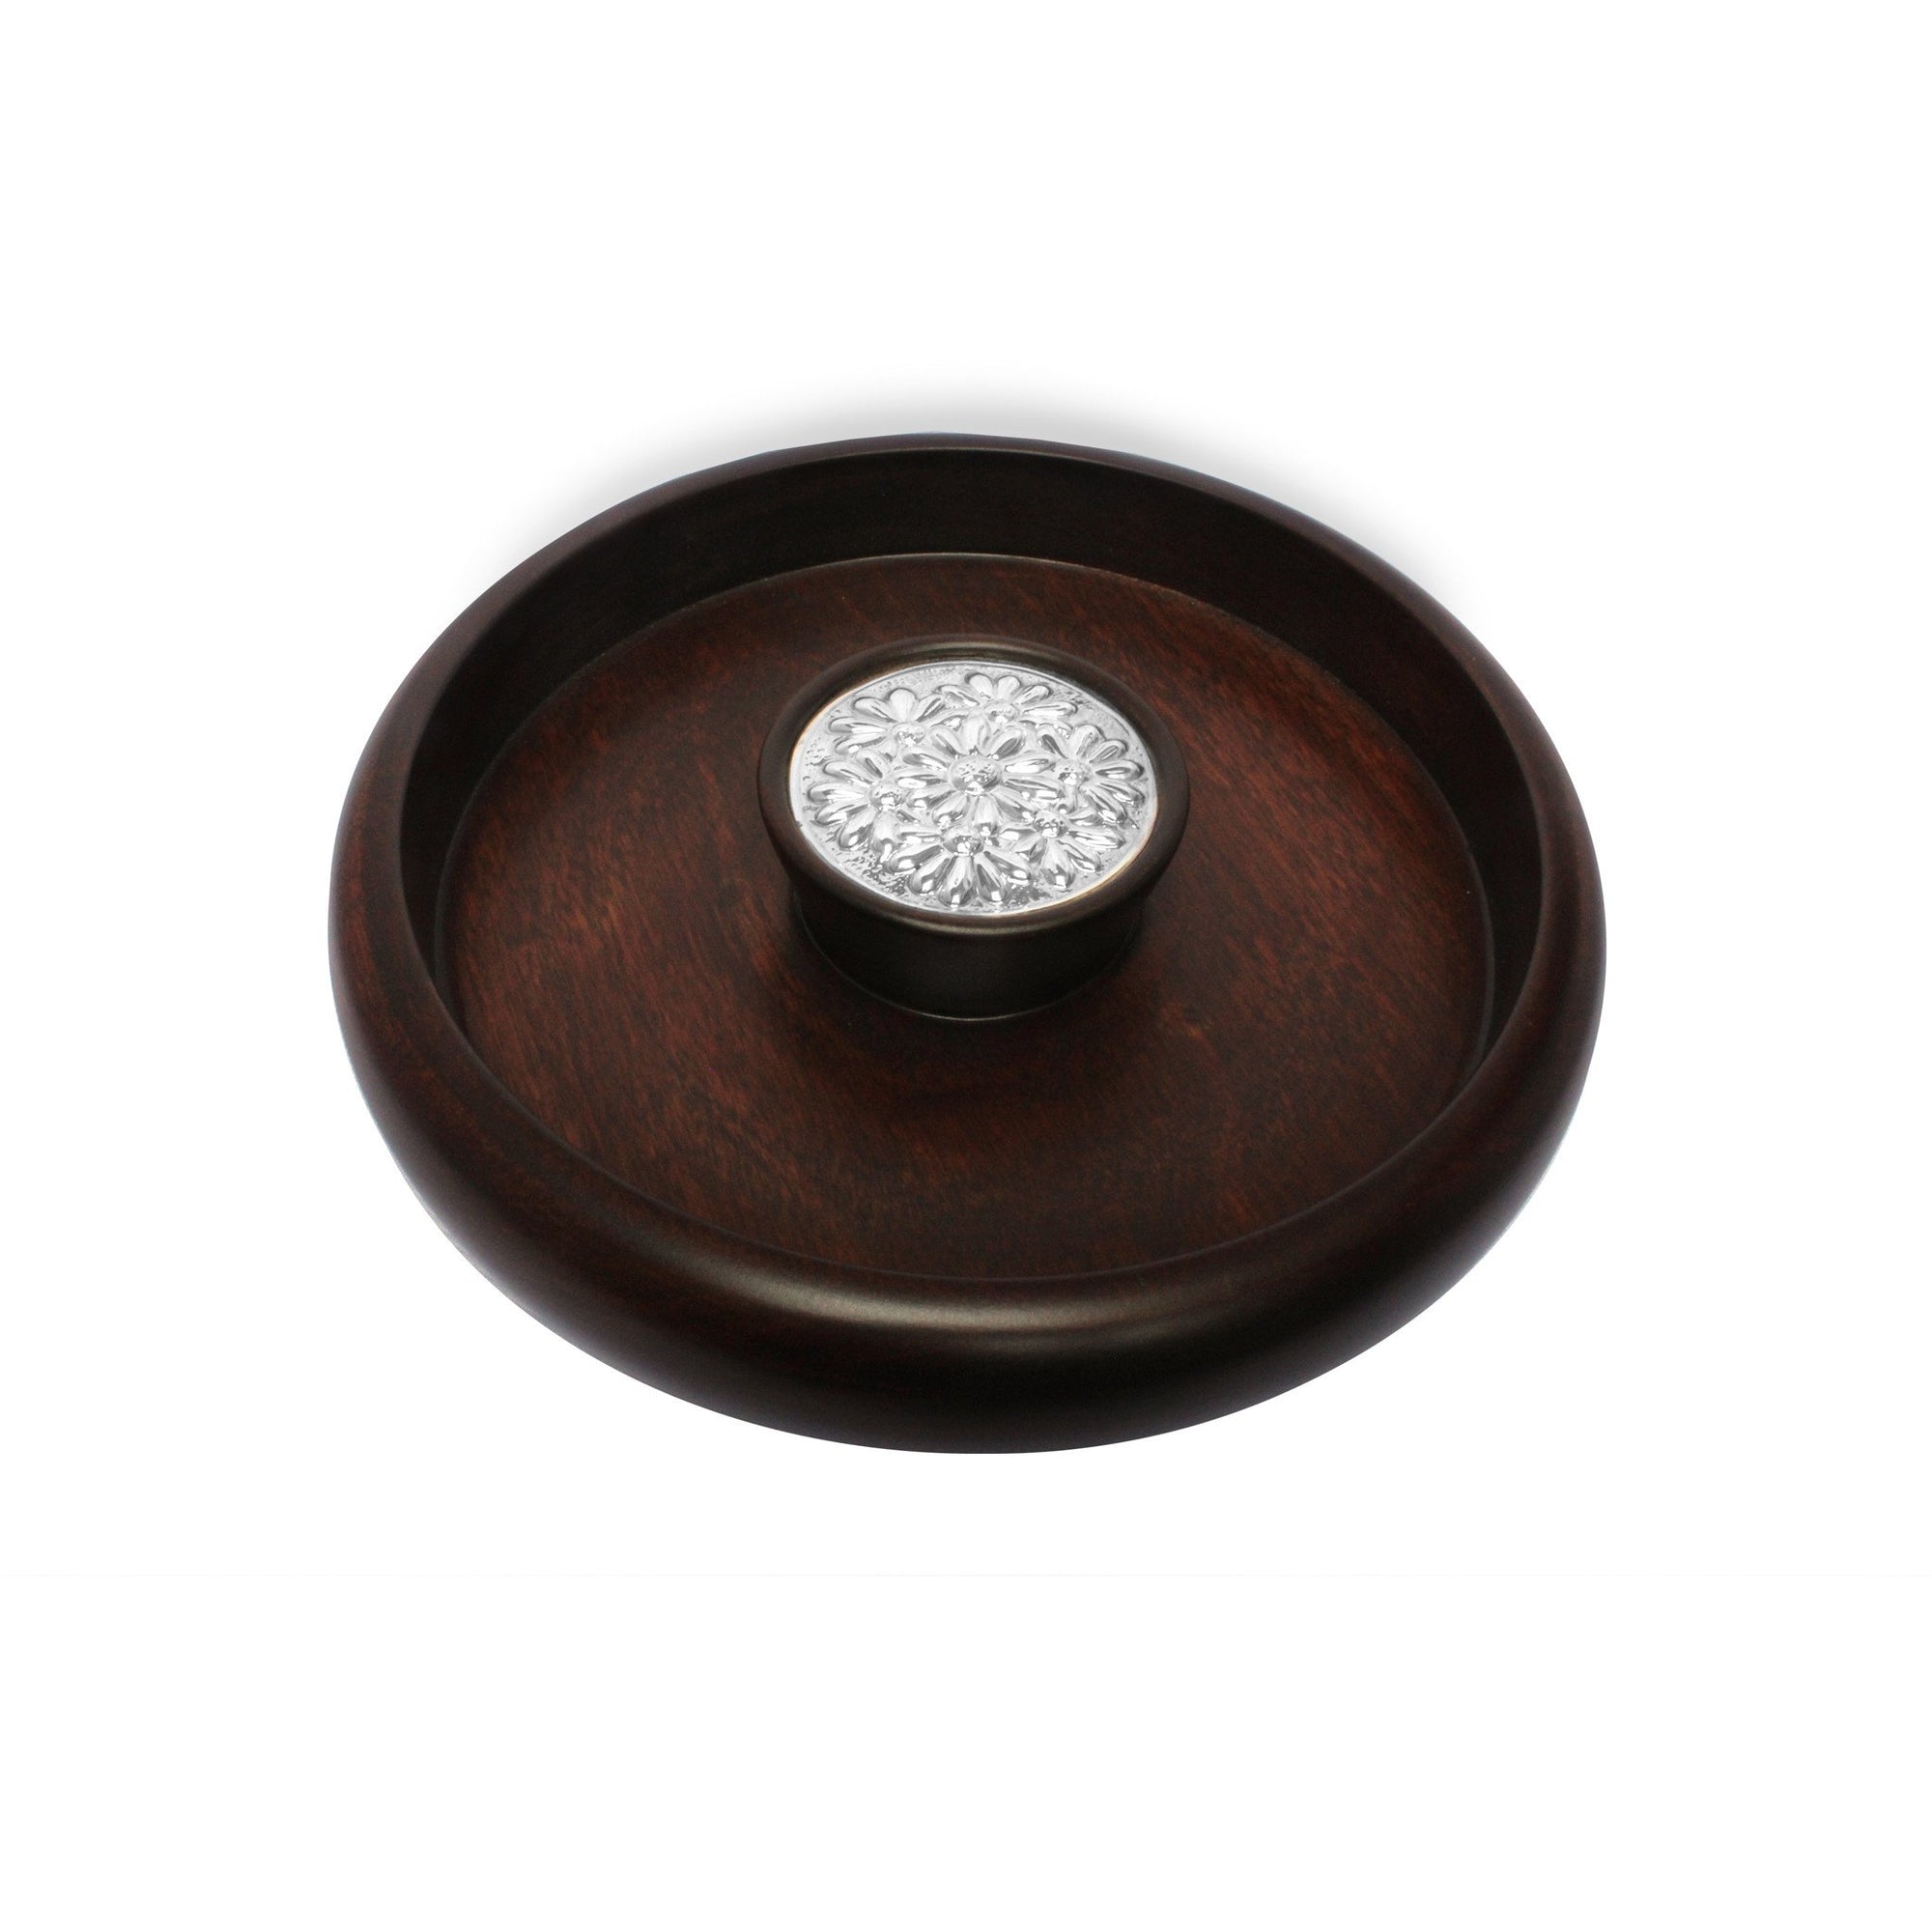 Mahogany Snack Bowl with Sterling Silver Daisies Accent - Qinti - The Peruvian Shop